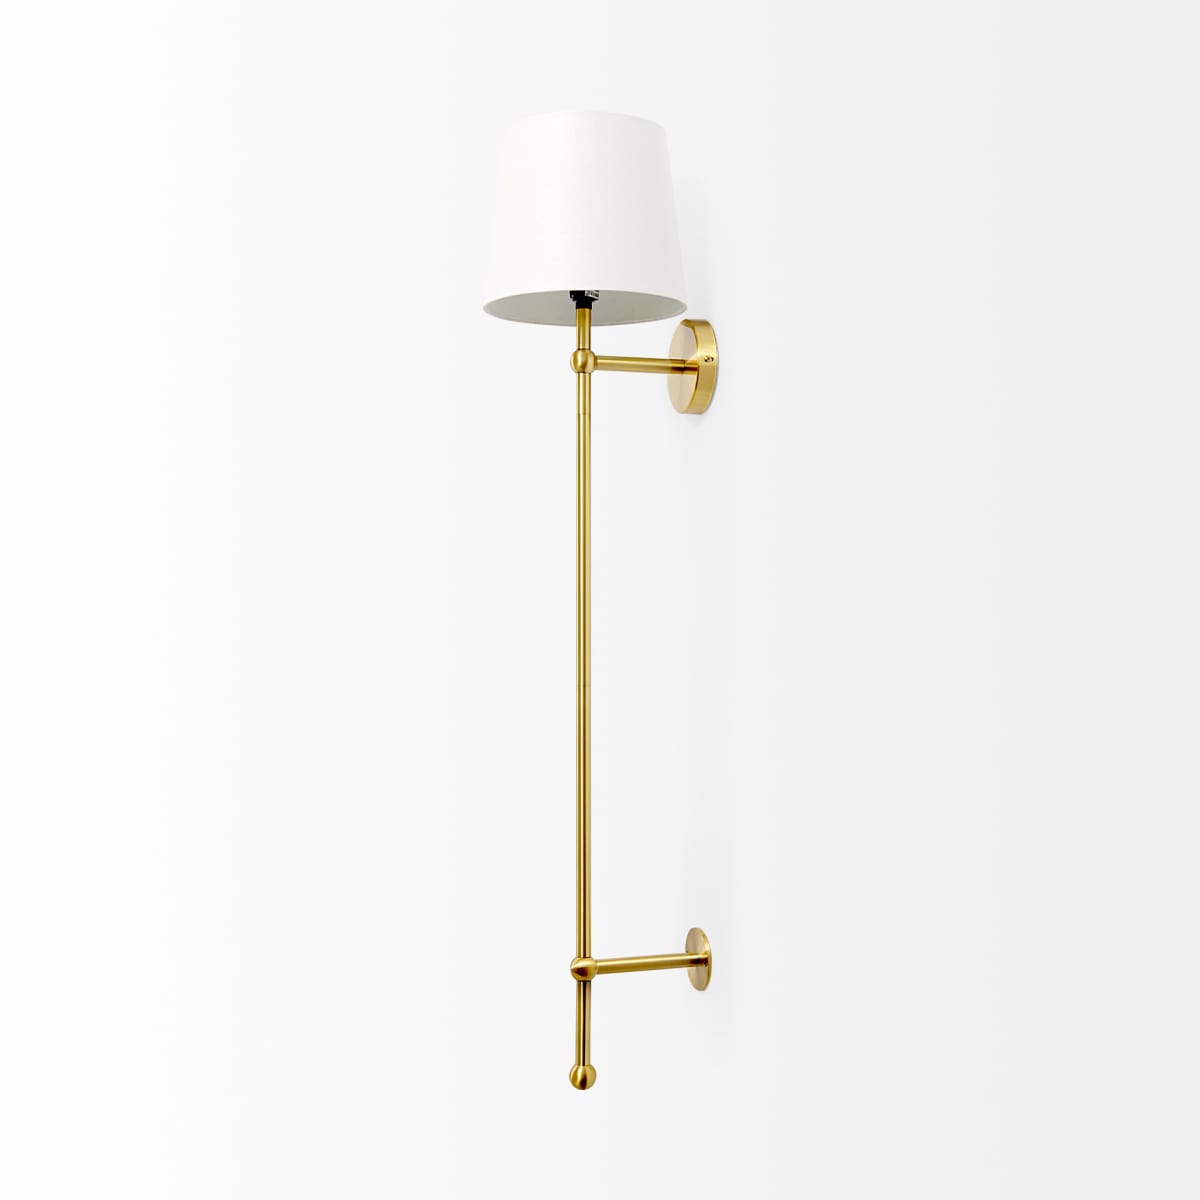 Chester Wall Sconce Gold Metal | Cream Shade - wall-fixtures